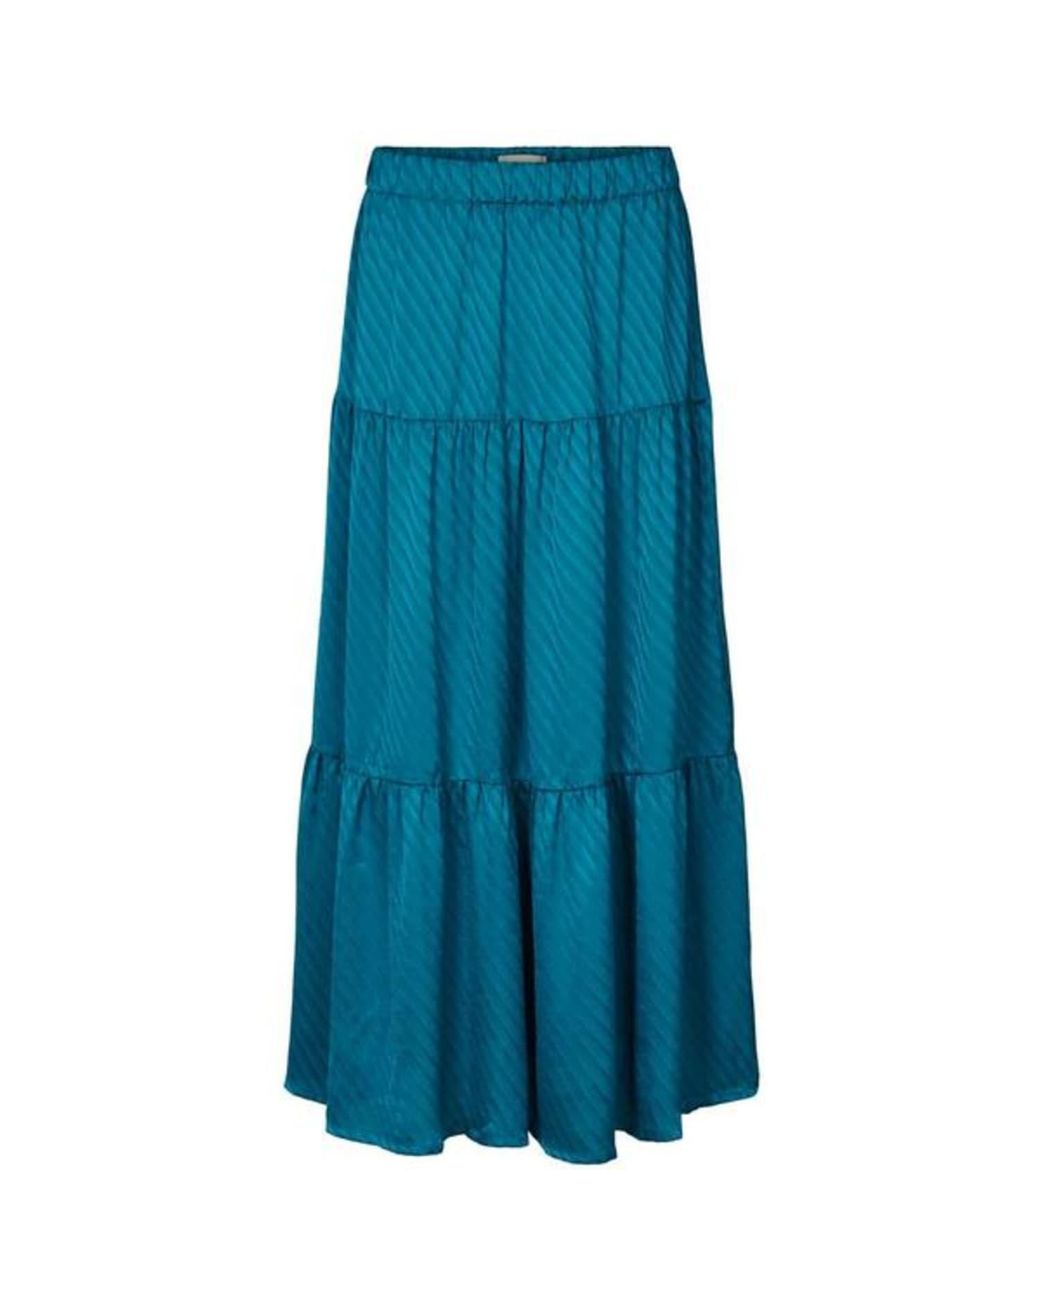 Lolly's Laundry Bonnie Petrol Skirt in Blue | Lyst